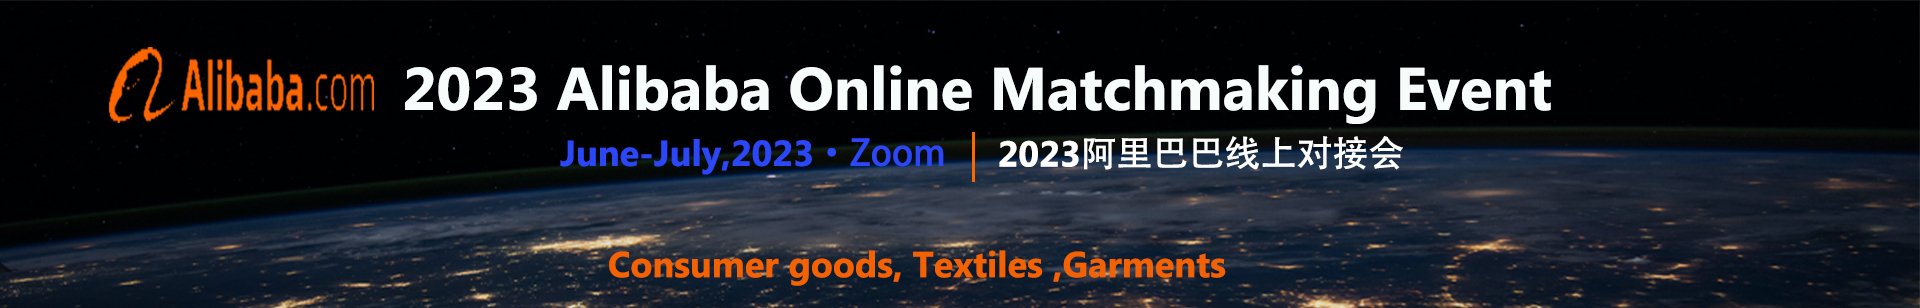 2023 Alibaba Online Matchmaking Event